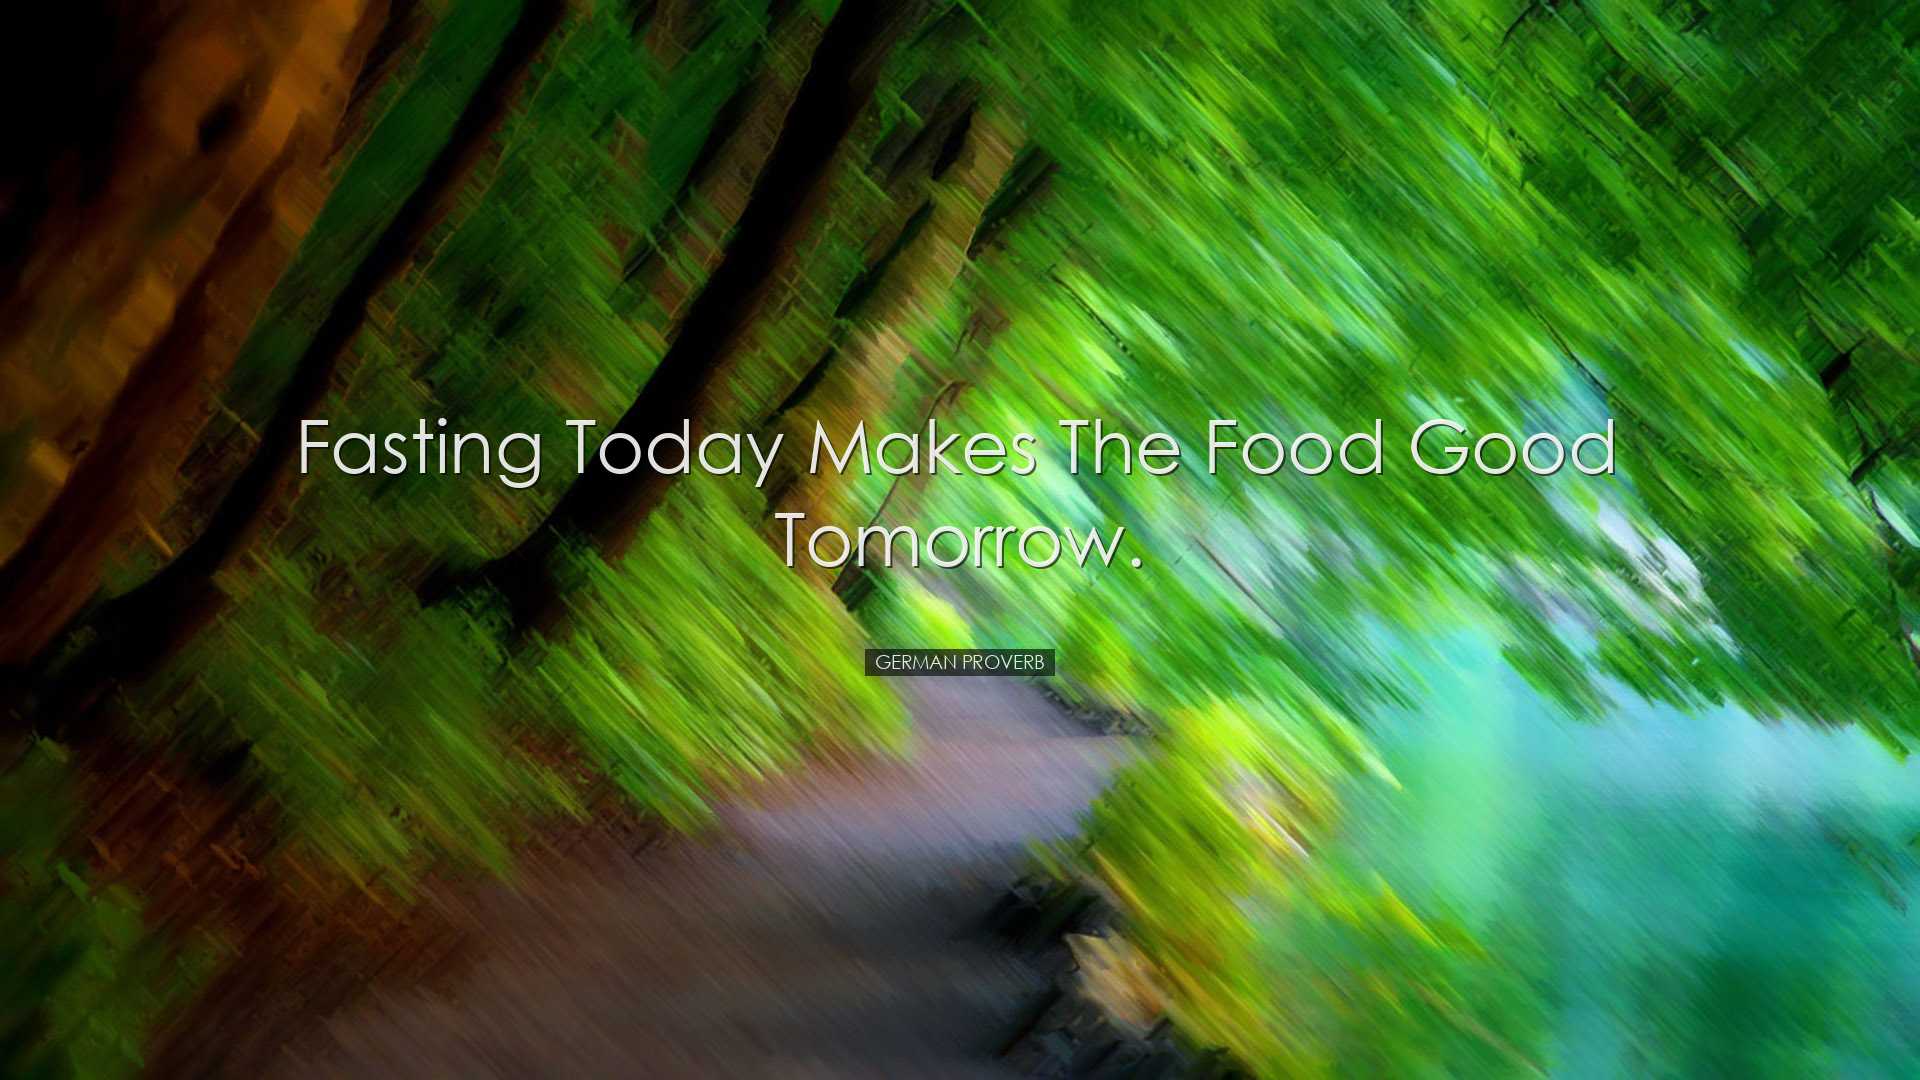 Fasting today makes the food good tomorrow. - German Proverb